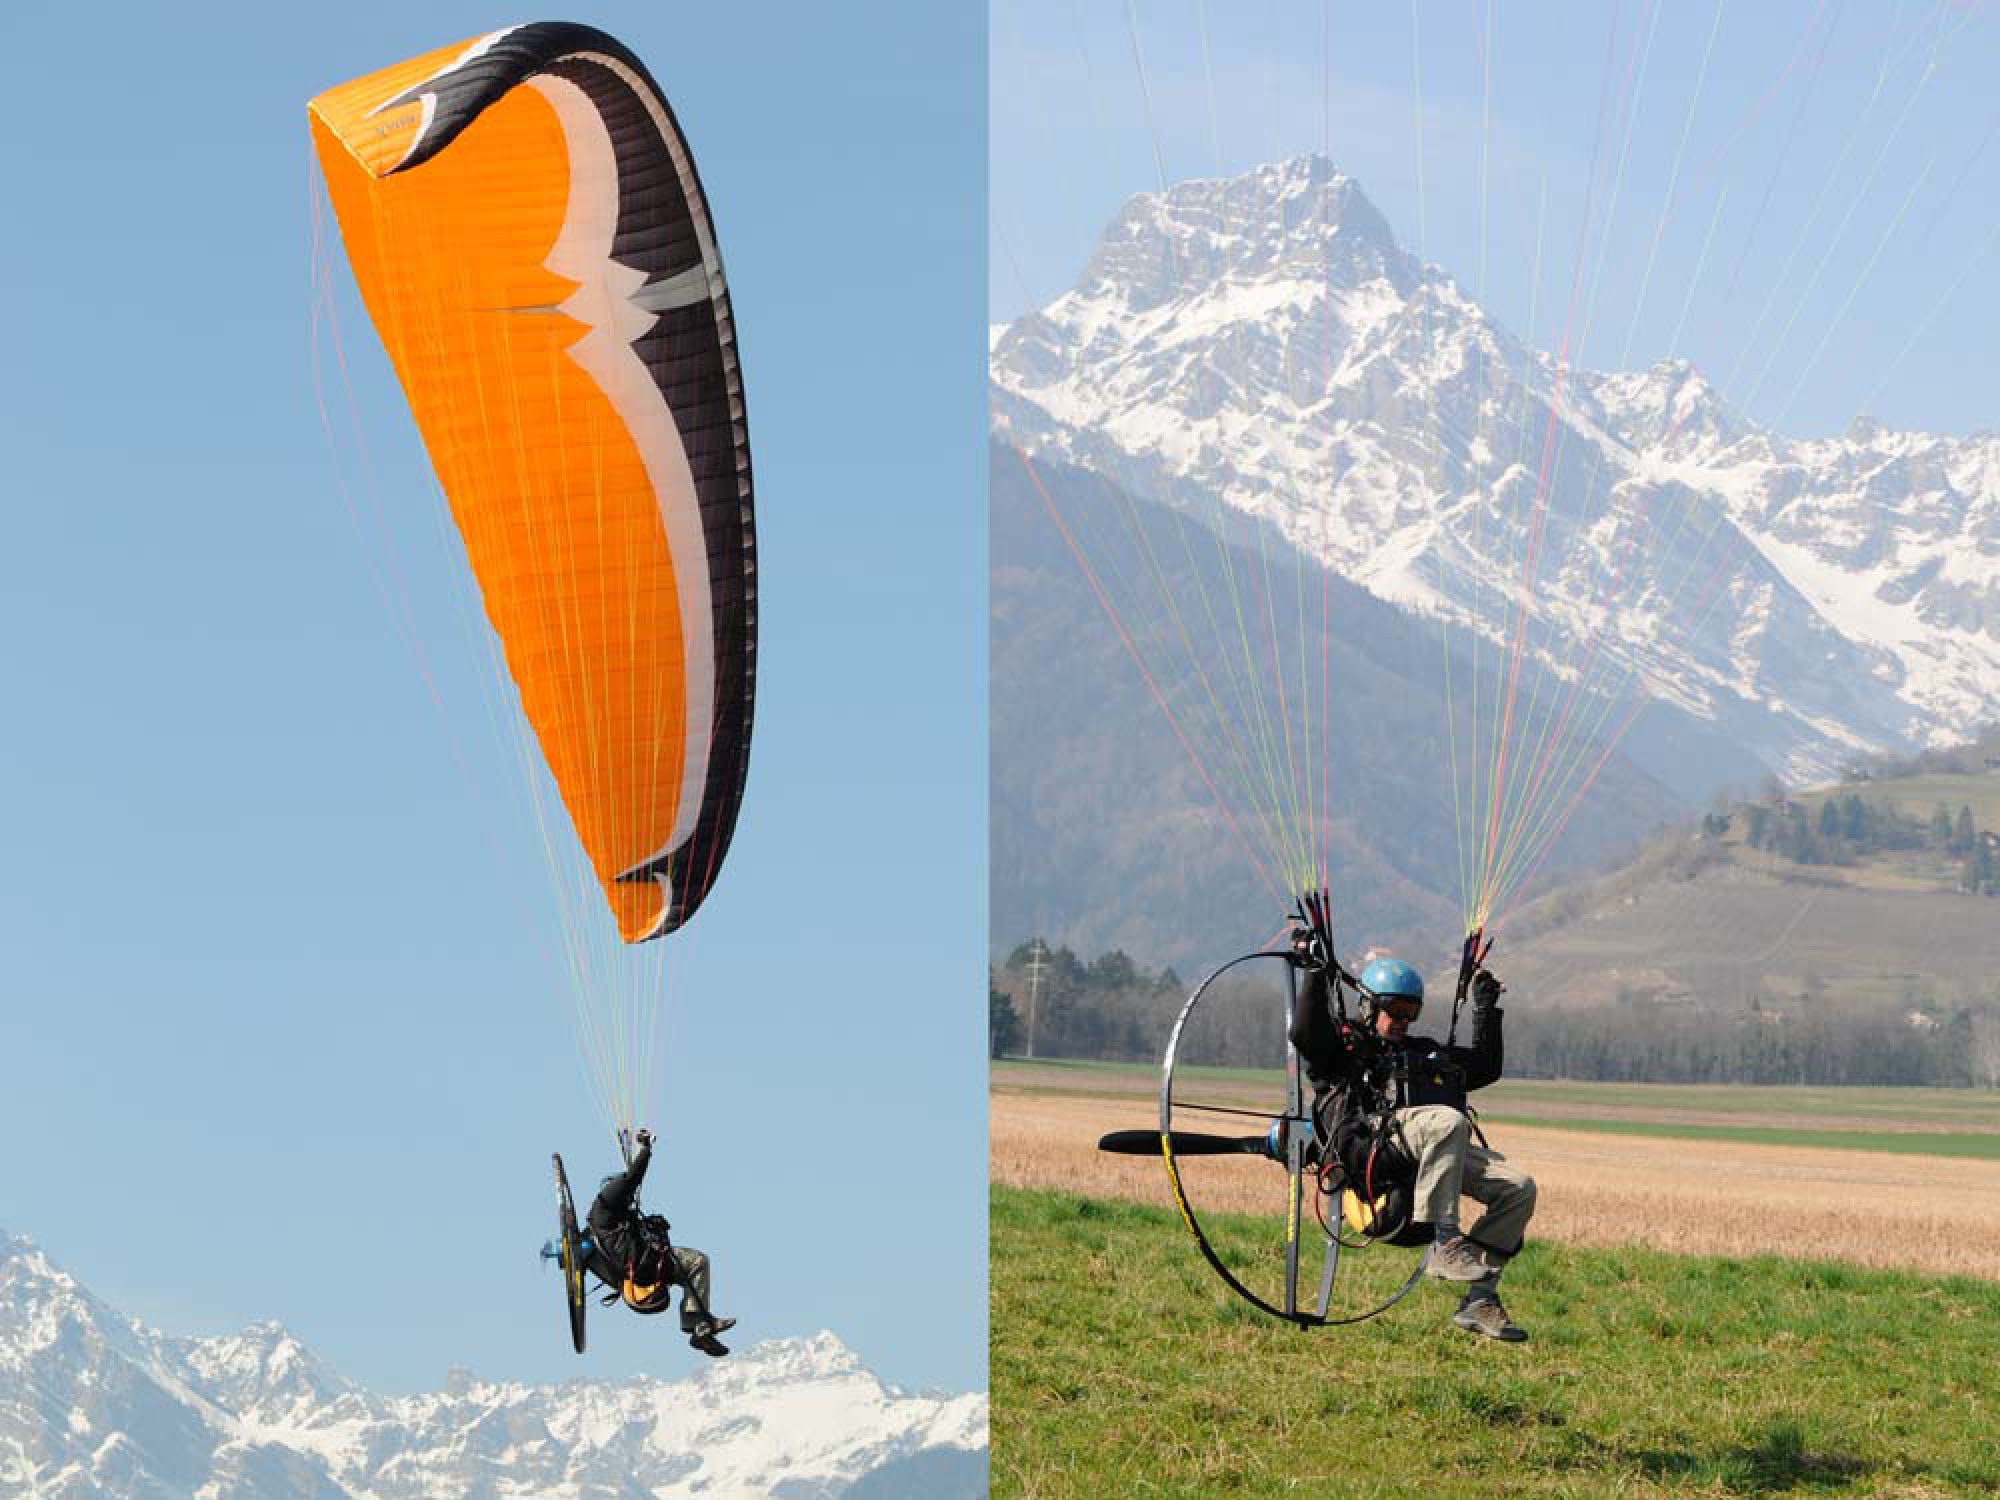 Electric paramotor, discipline of the FSVL since 2016